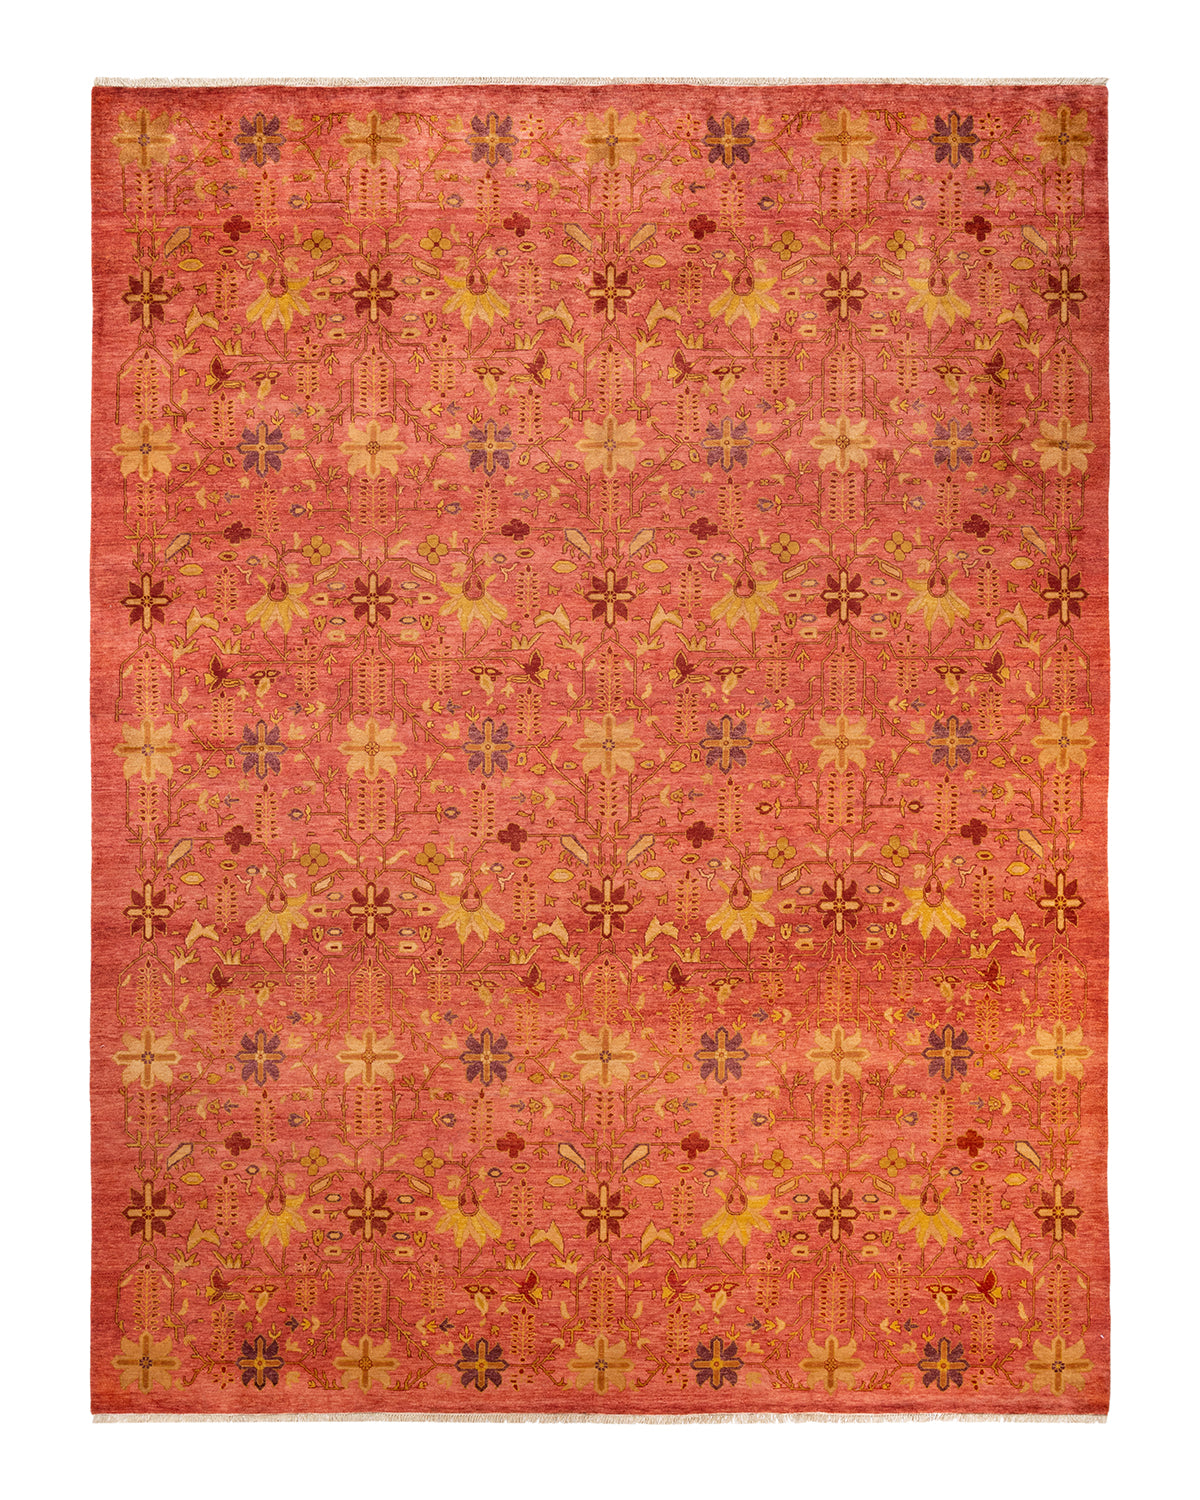 Eclectic, One-of-a-Kind Hand-Knotted Area Rug  - Orange, 9' 3" x 12' 1"